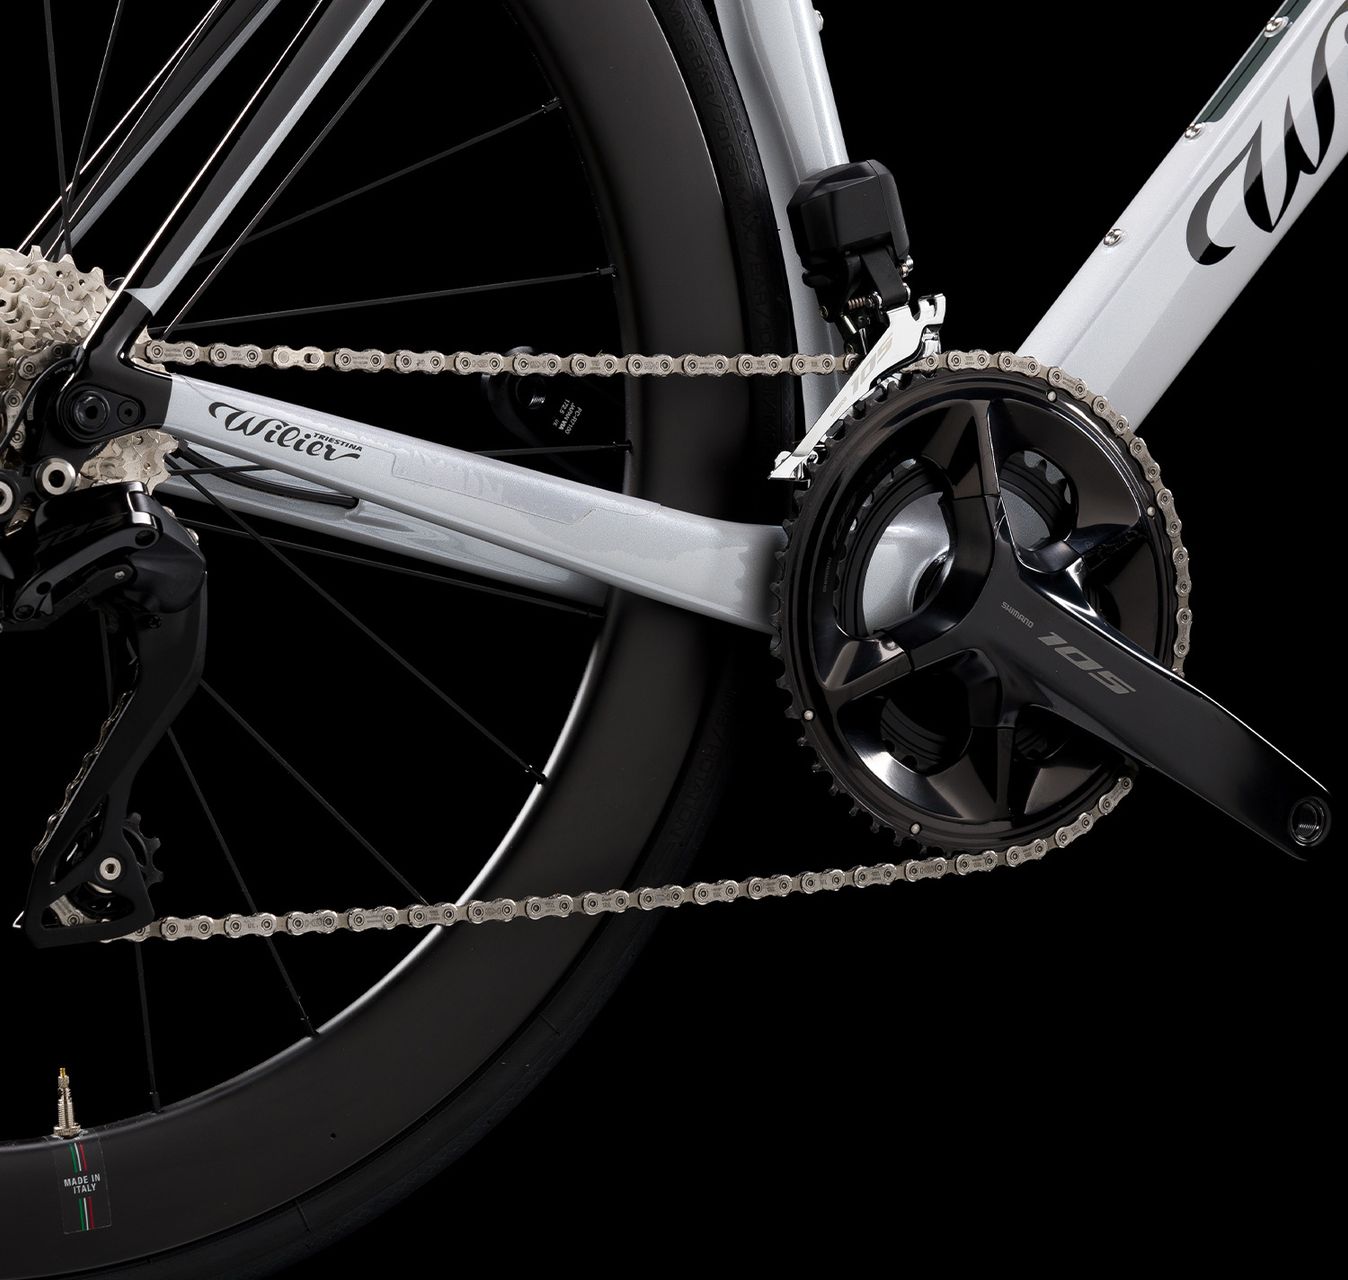 The bike comes specced with mid-range groupsets like Shimano's 105 Di2